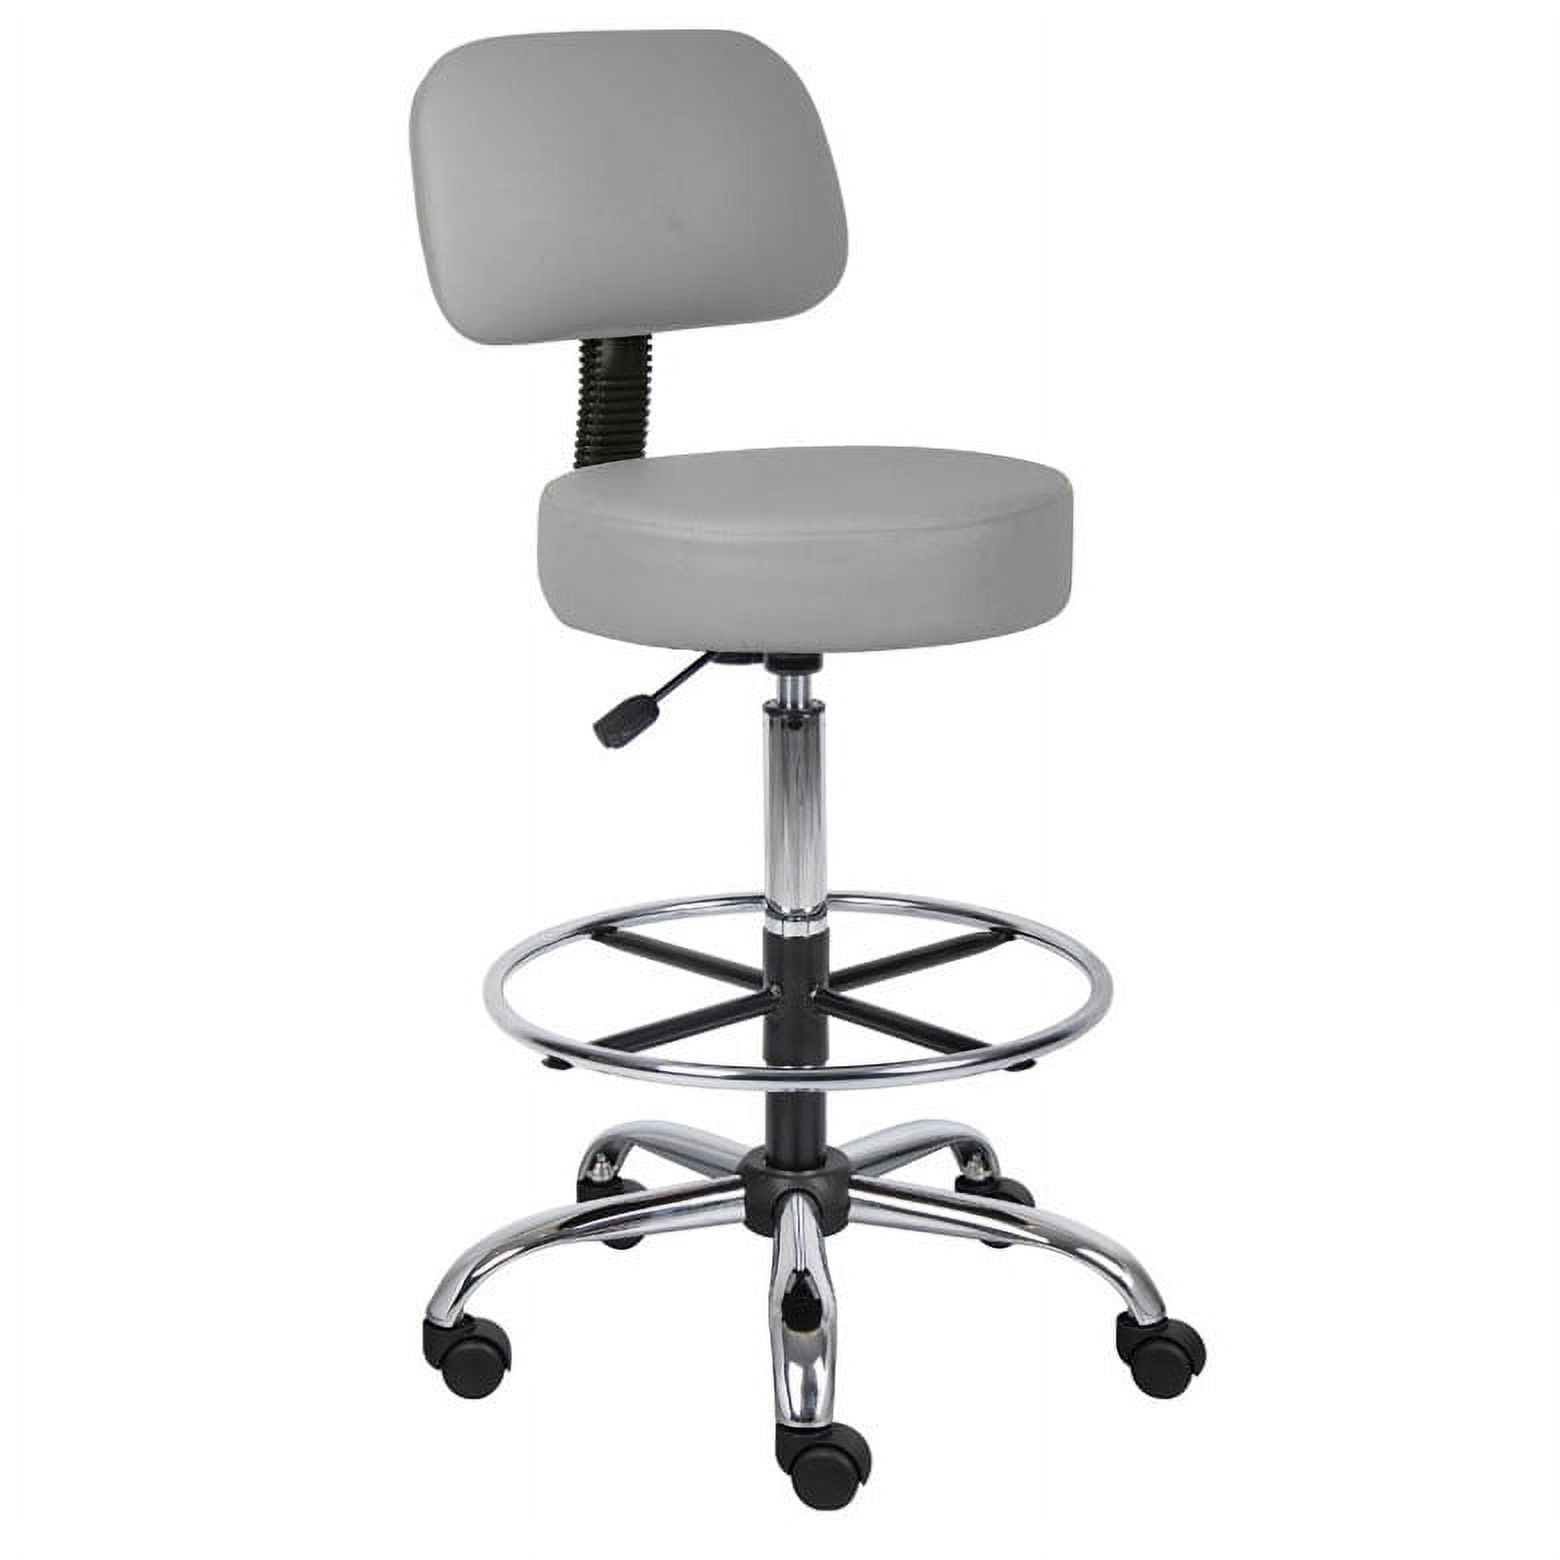 Picture of Norstar B16245-GY Caressoft Medical Drafting Stool with Back Cushion and Foot Ring- Grey